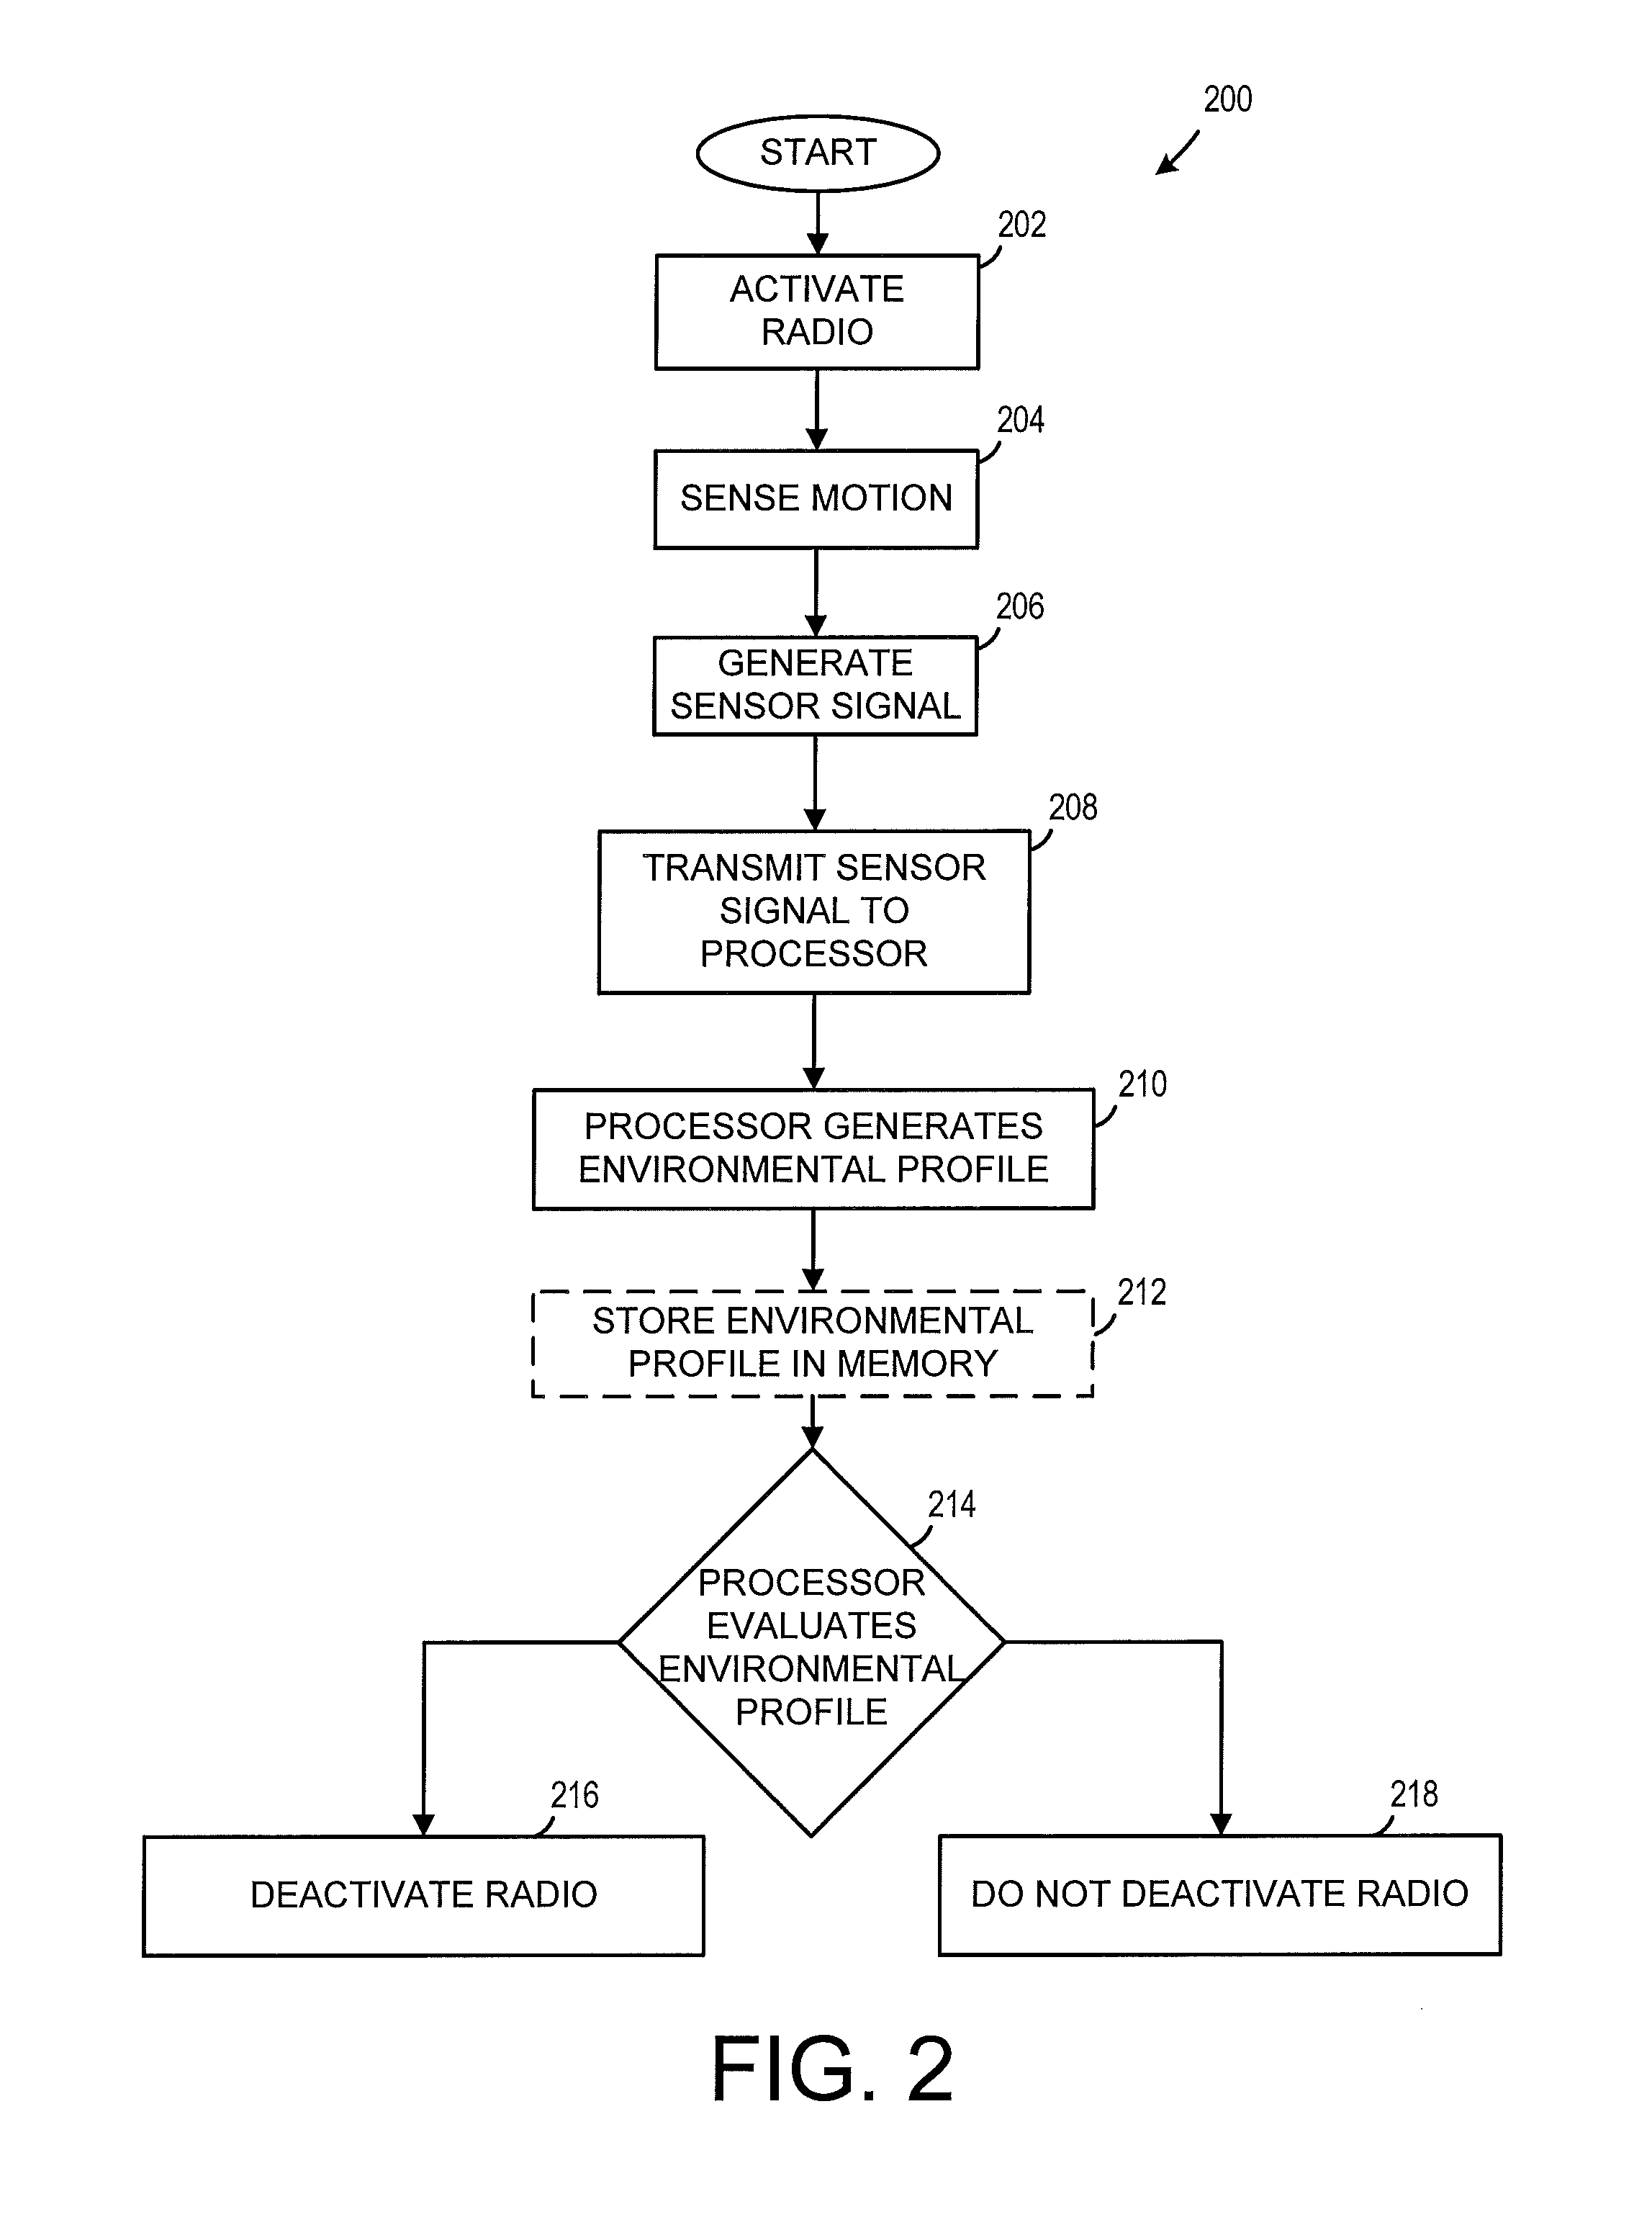 Energy efficient roaming of a mobile device